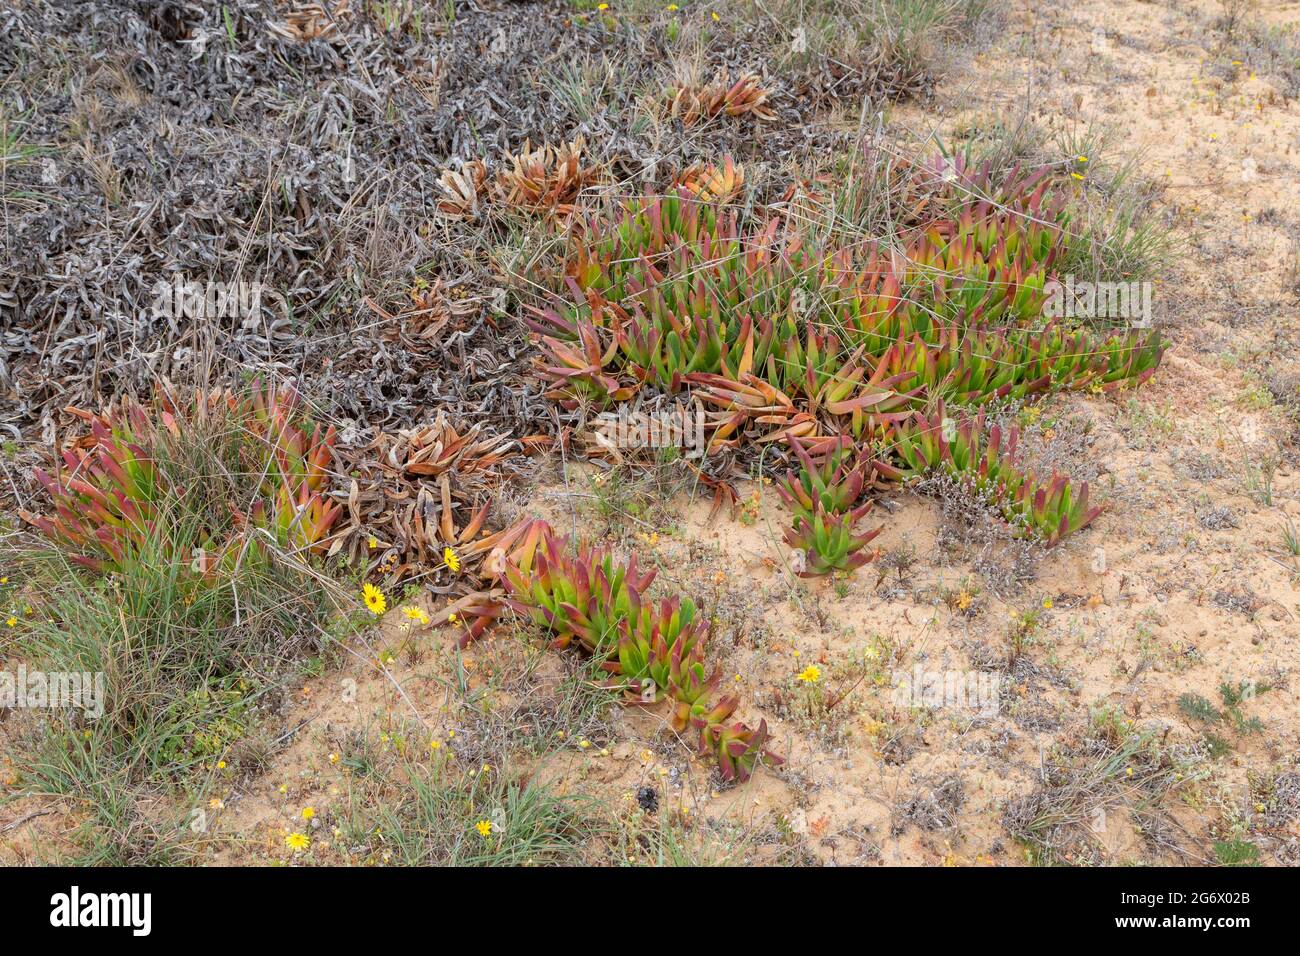 Crassula sp. in natural habitat close to Nieuwoudtville in the Northern Cape of South Africa Stock Photo